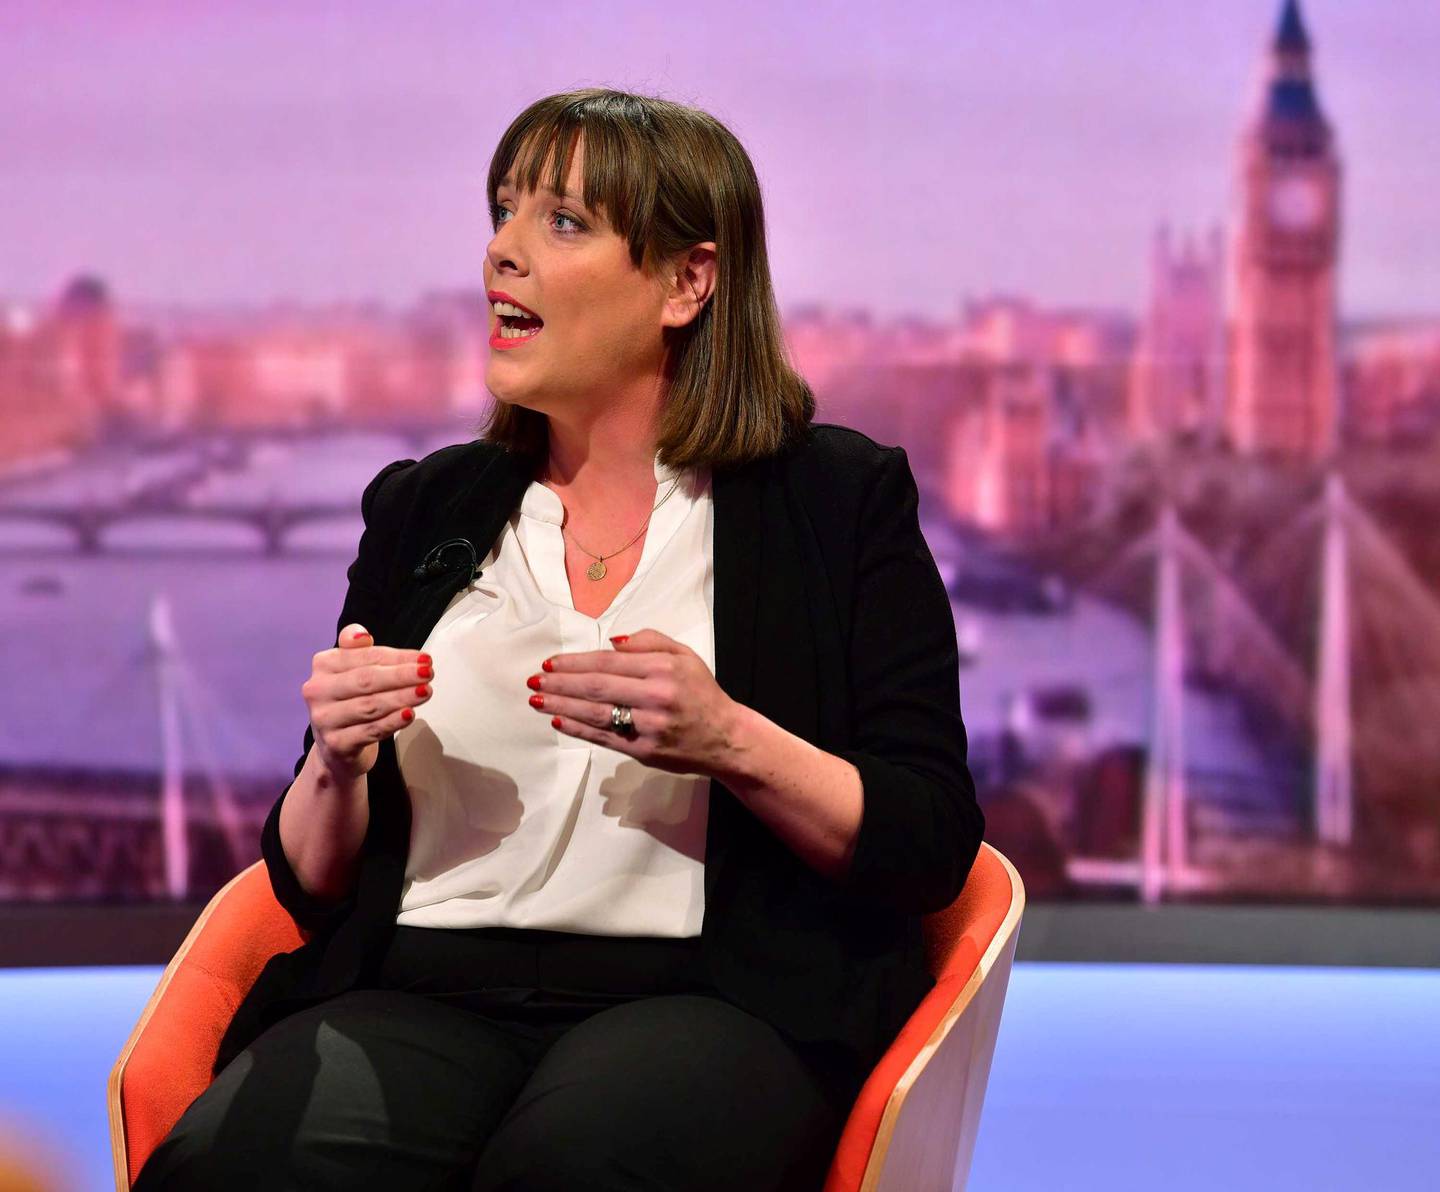 Britain's Labour MP Jess Phillips gestures as she appears on BBC TV's The Andrew Marr Show in London, Britain January 5, 2020. Jeff Overs/BBC/Handout via REUTERS ATTENTION EDITORS - THIS IMAGE HAS BEEN SUPPLIED BY A THIRD PARTY. NO RESALES. NO ARCHIVES. NOT FOR USE MORE THAN 21 DAYS AFTER ISSUE.